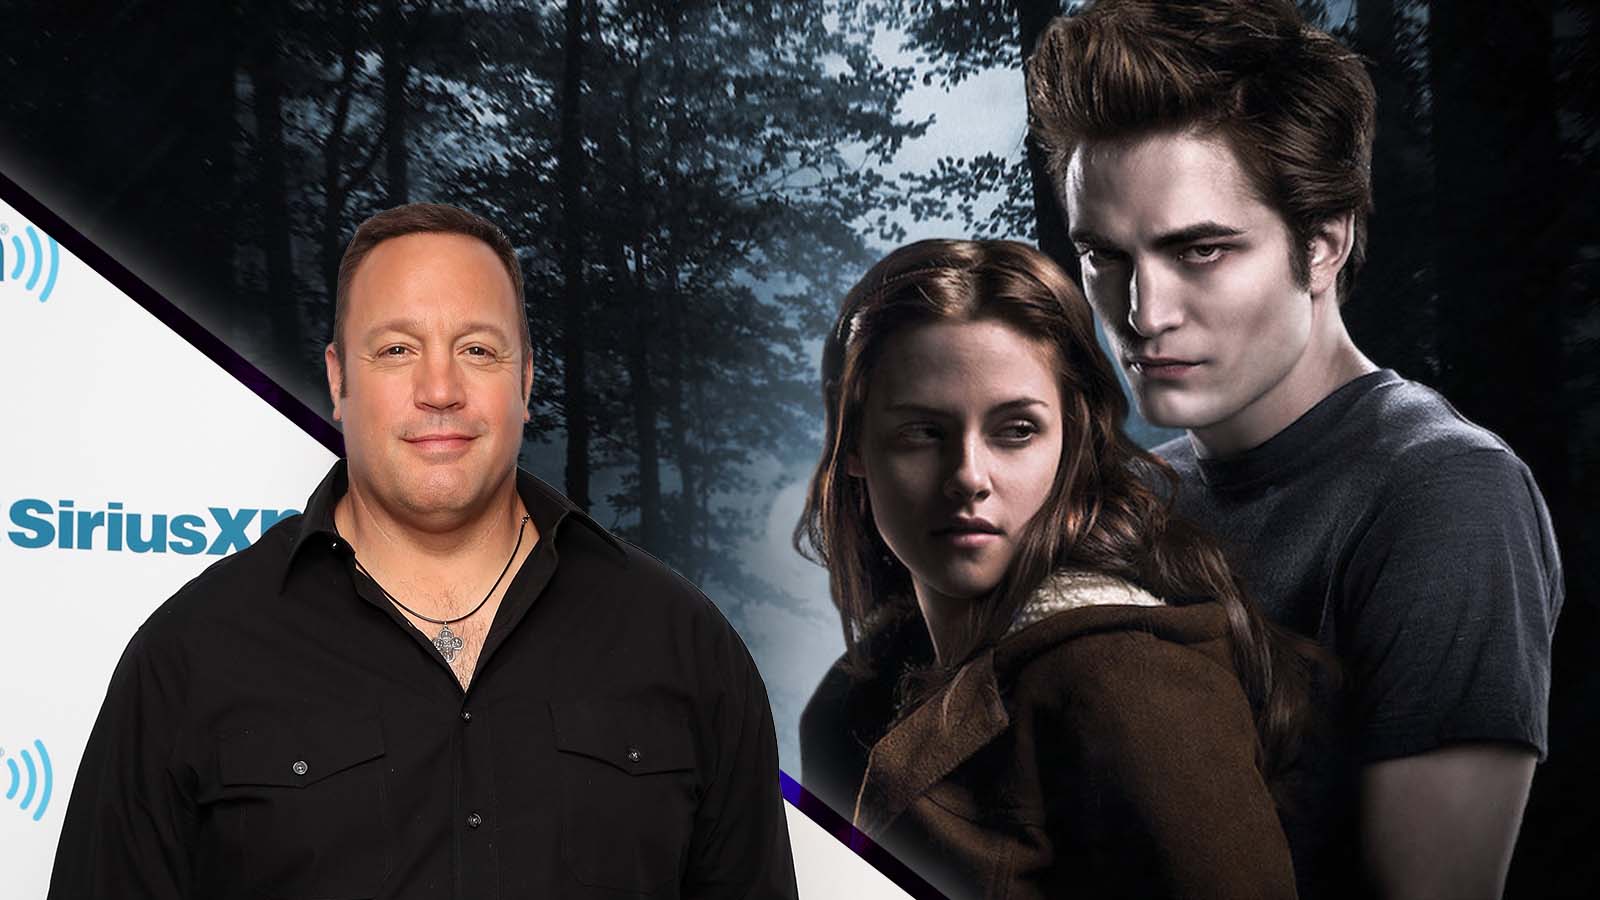 Kevin James says he’s starting a ‘Twilight’ fan club for dads